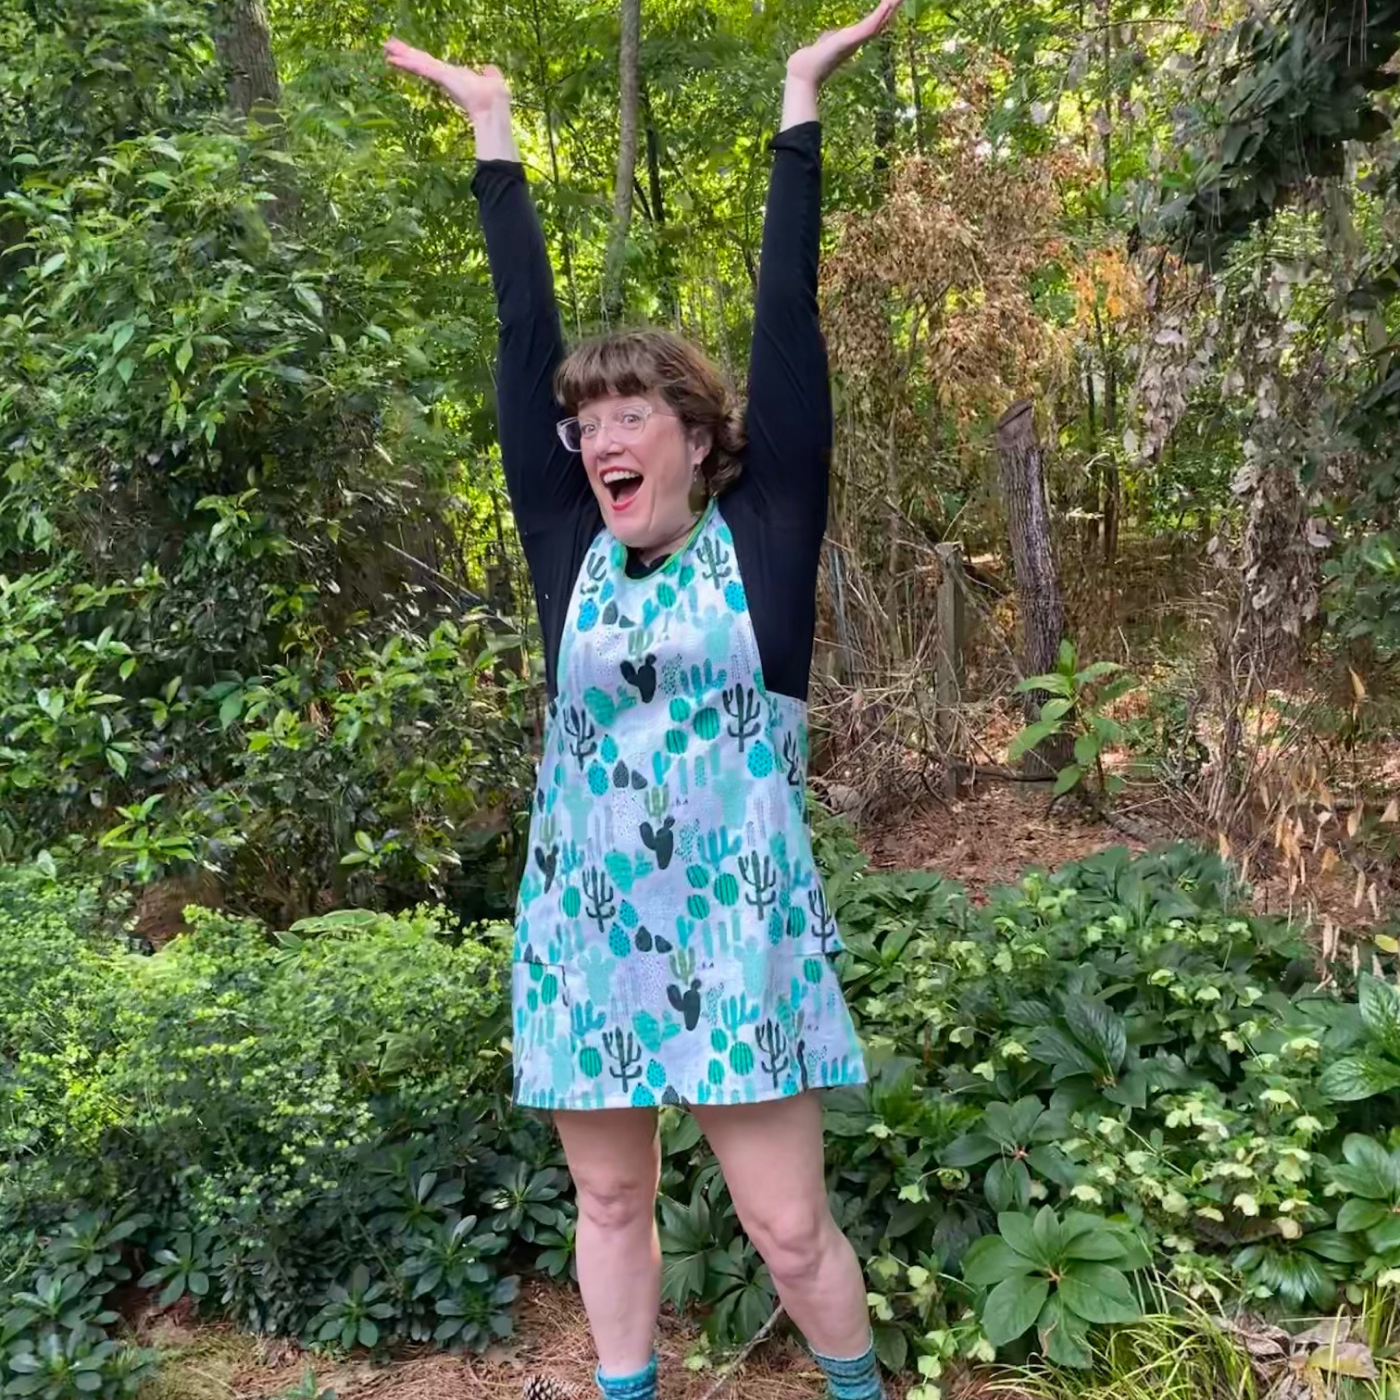 Betsy smiles and is wearing a pinafore with a gray background and repeating design of differing types of cacti. She is standing in a backyard full of green plants. Her hands are held up straight over her head.